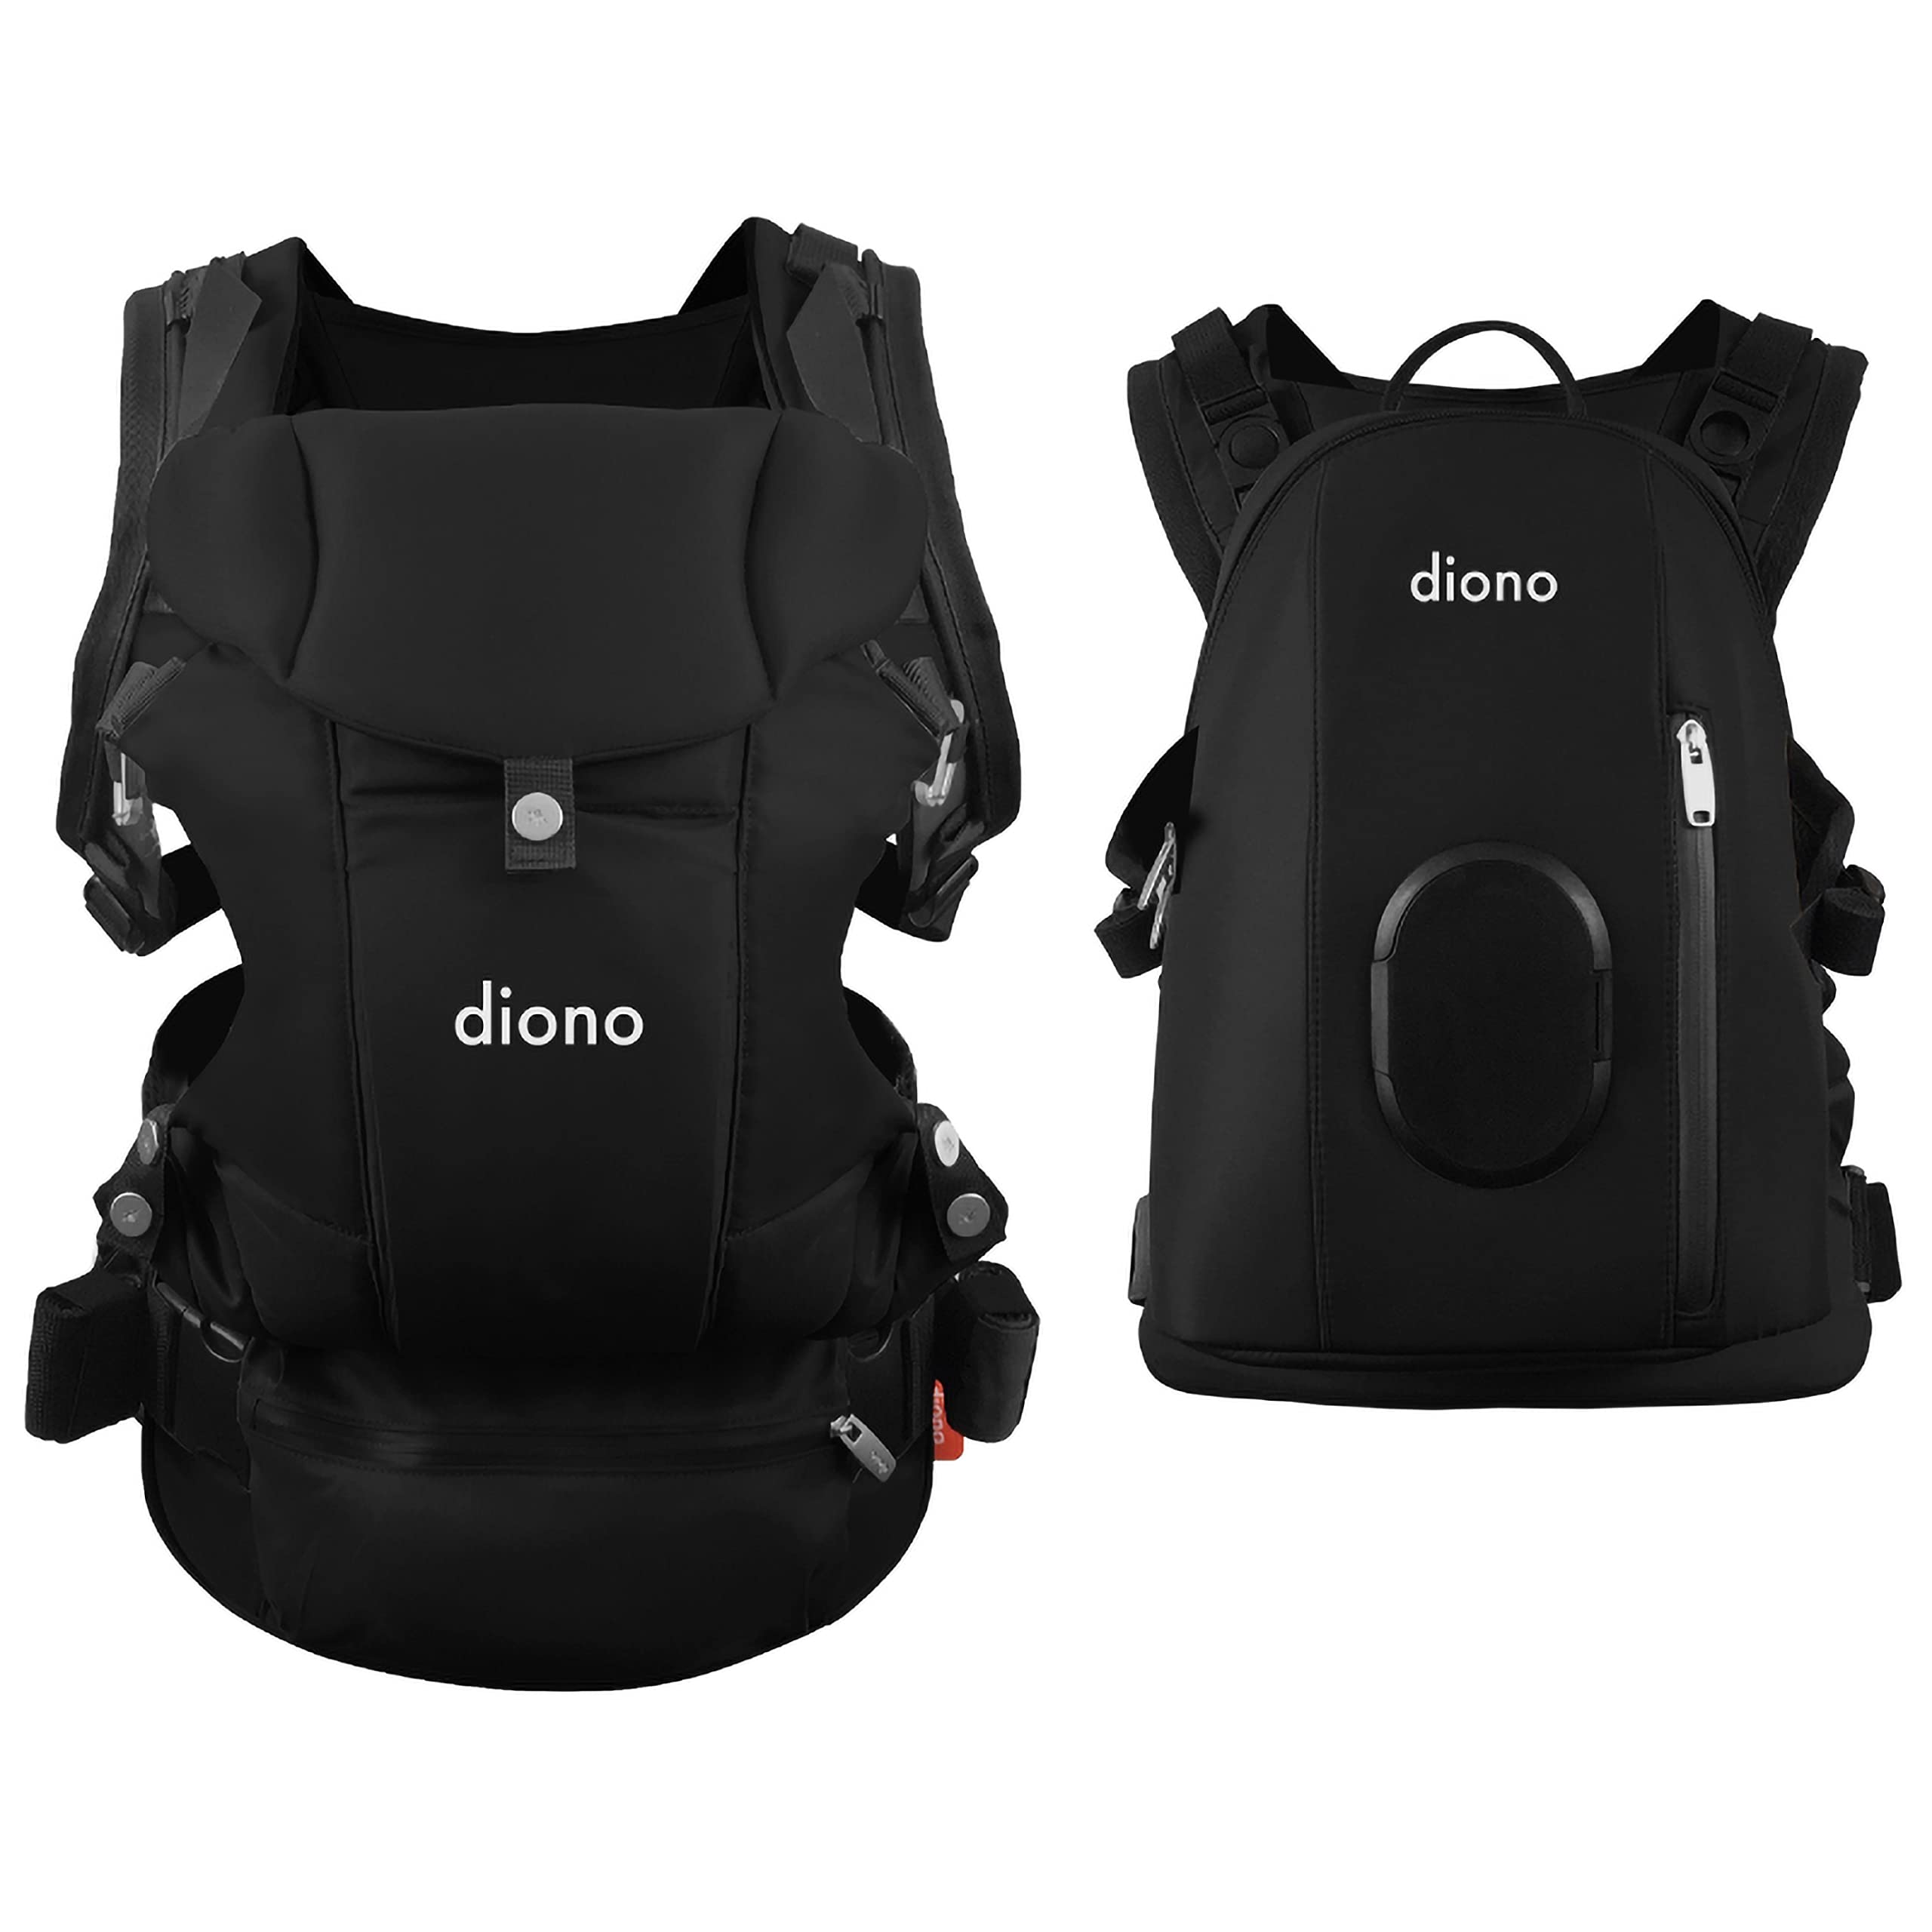 Diono Carus Complete 4-in-1 Baby Carrier with Detachable Backpack, Front Carry & Back Carry, Newborn to Toddler up to 33 lb / 15 kg, Black